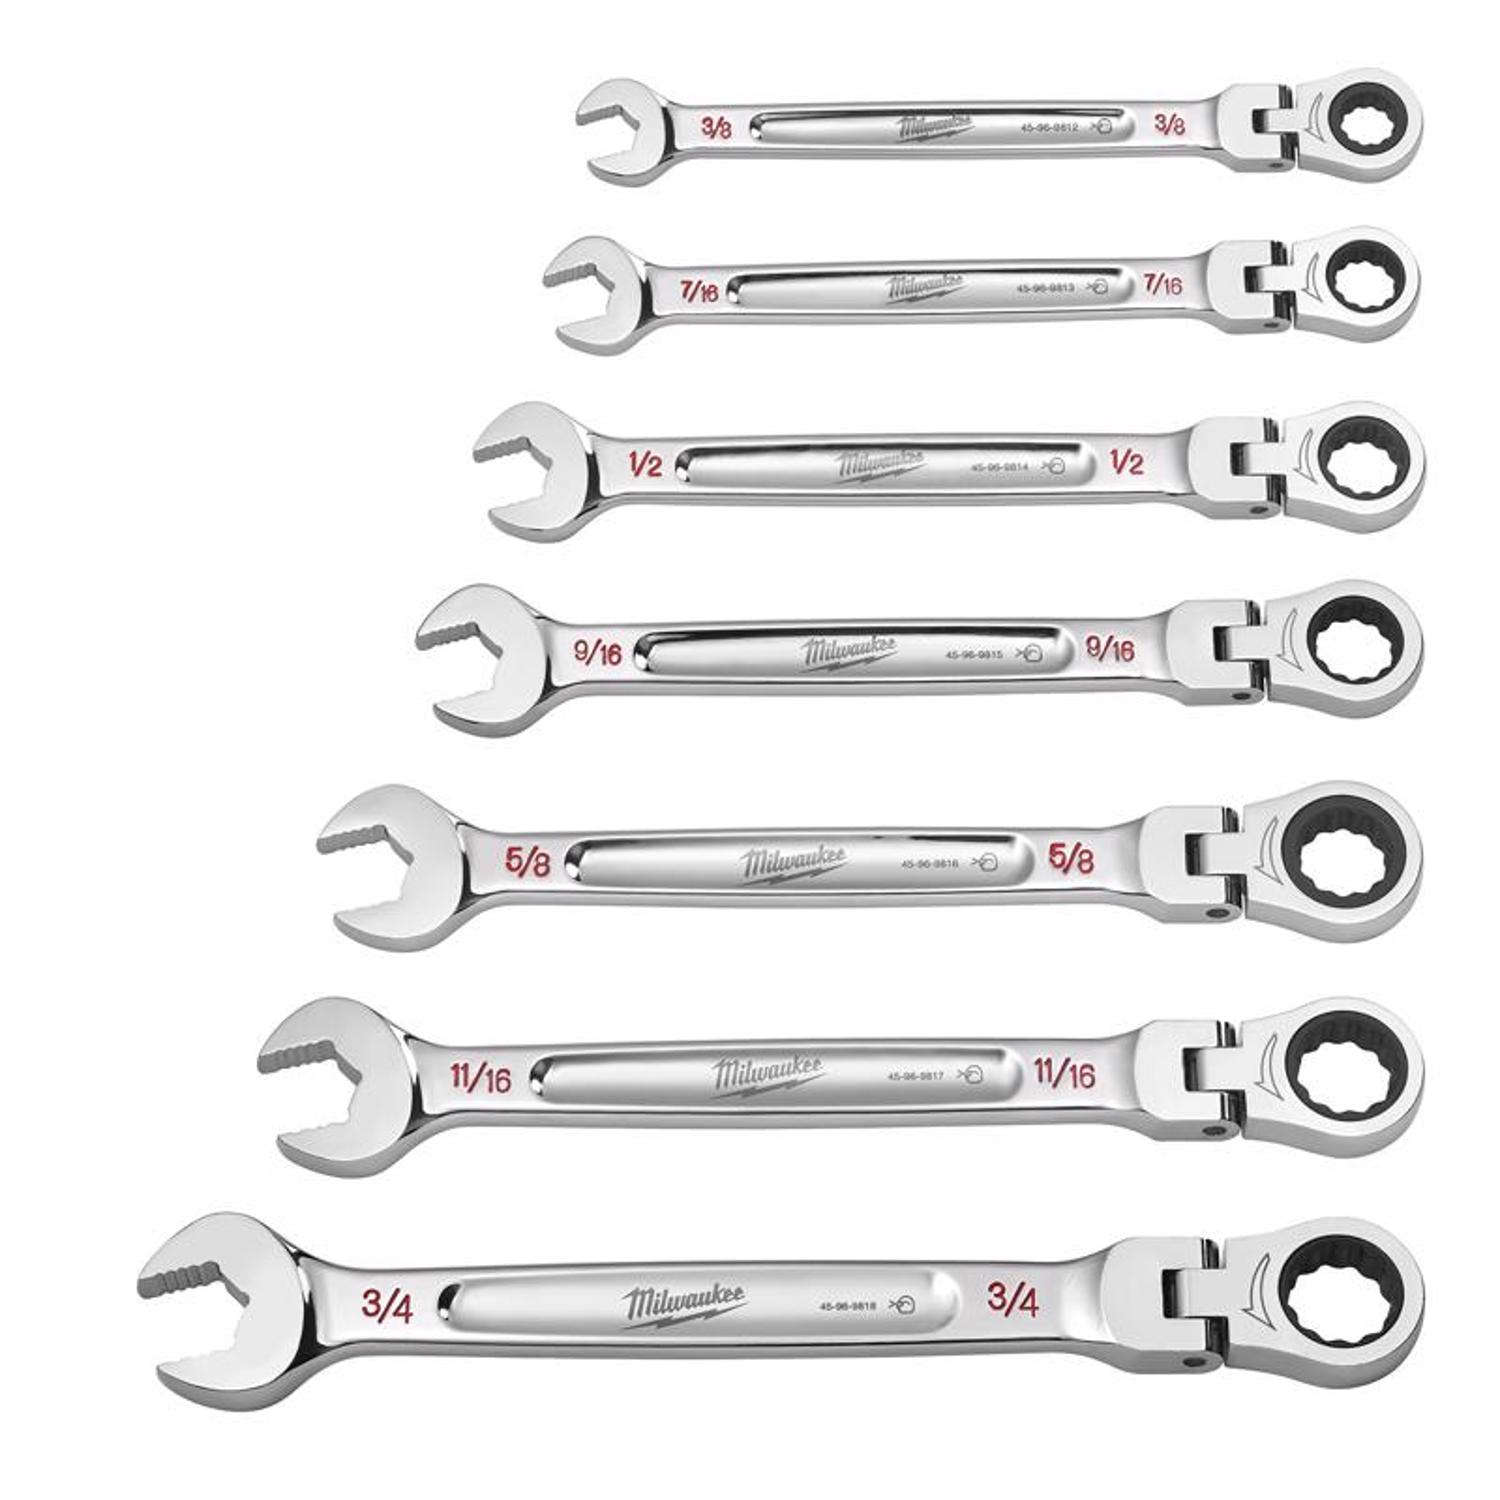 Grant's Garage Refrigeration Tool Set 4 pack: 1 Green Service Wrench (1/4,  3/8, 3/16 & 5/16) + 1 Ratchet Box End Wrench (5/16 x 1/4) + 2 Air  Conditioning Valve Hex Tools, Box-End Wrenches -  Canada